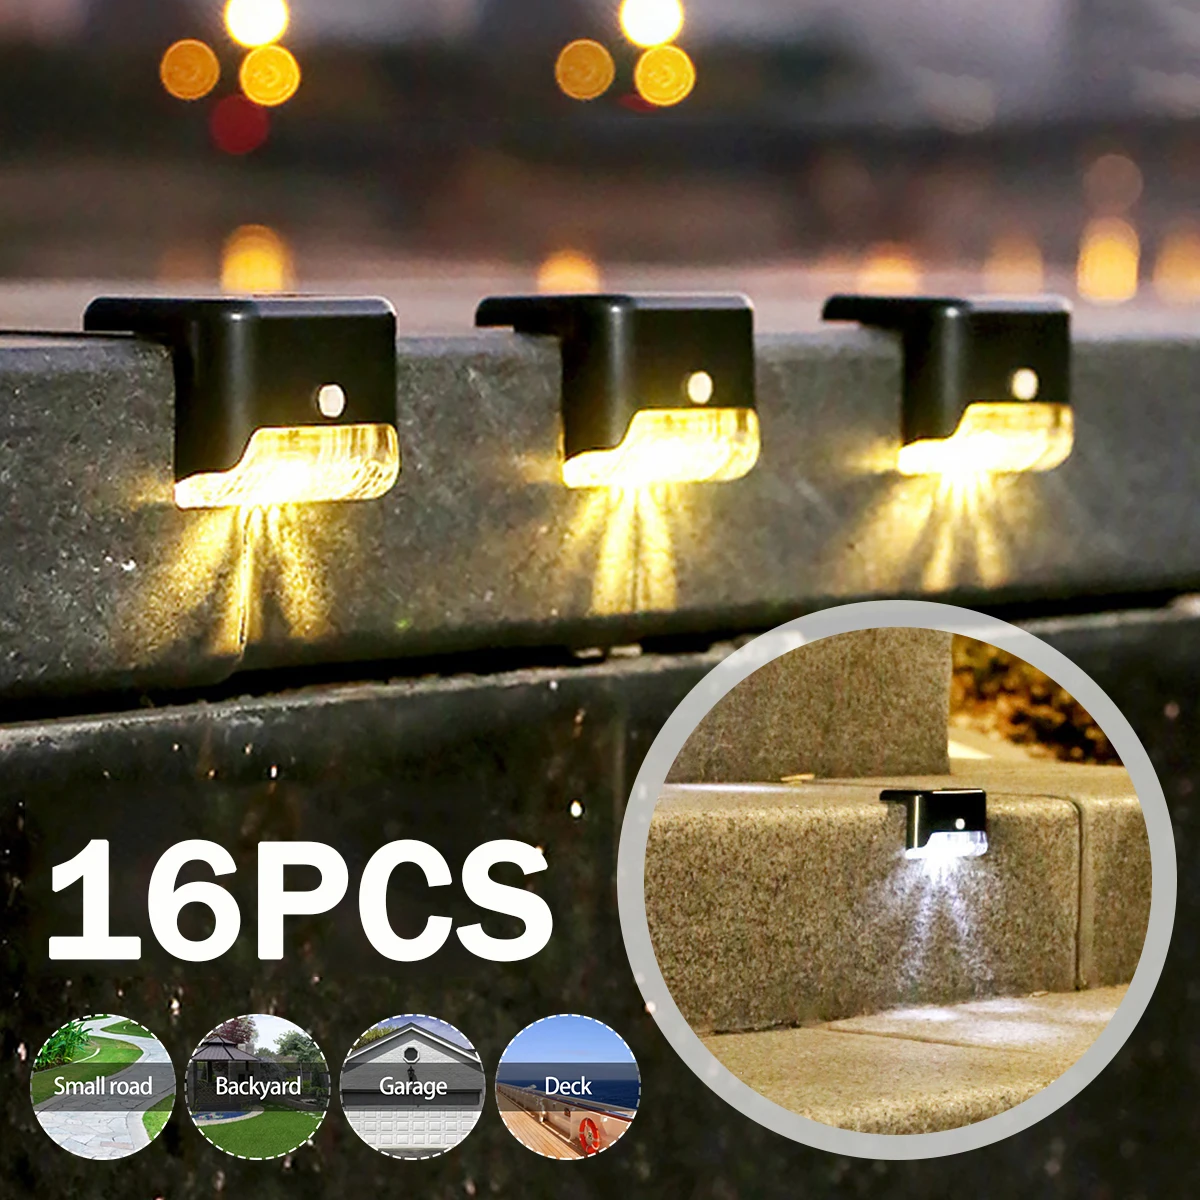 Solar Light Outdoors Ip65 Luces Solares Para Ce Exterior Step Deck Lights Lamps Garden Lighting Fence Courtyard Decor beams miniature stage light tool safety mix tool hanging strobe music waterproof stage light ramp luces navidad dance floor